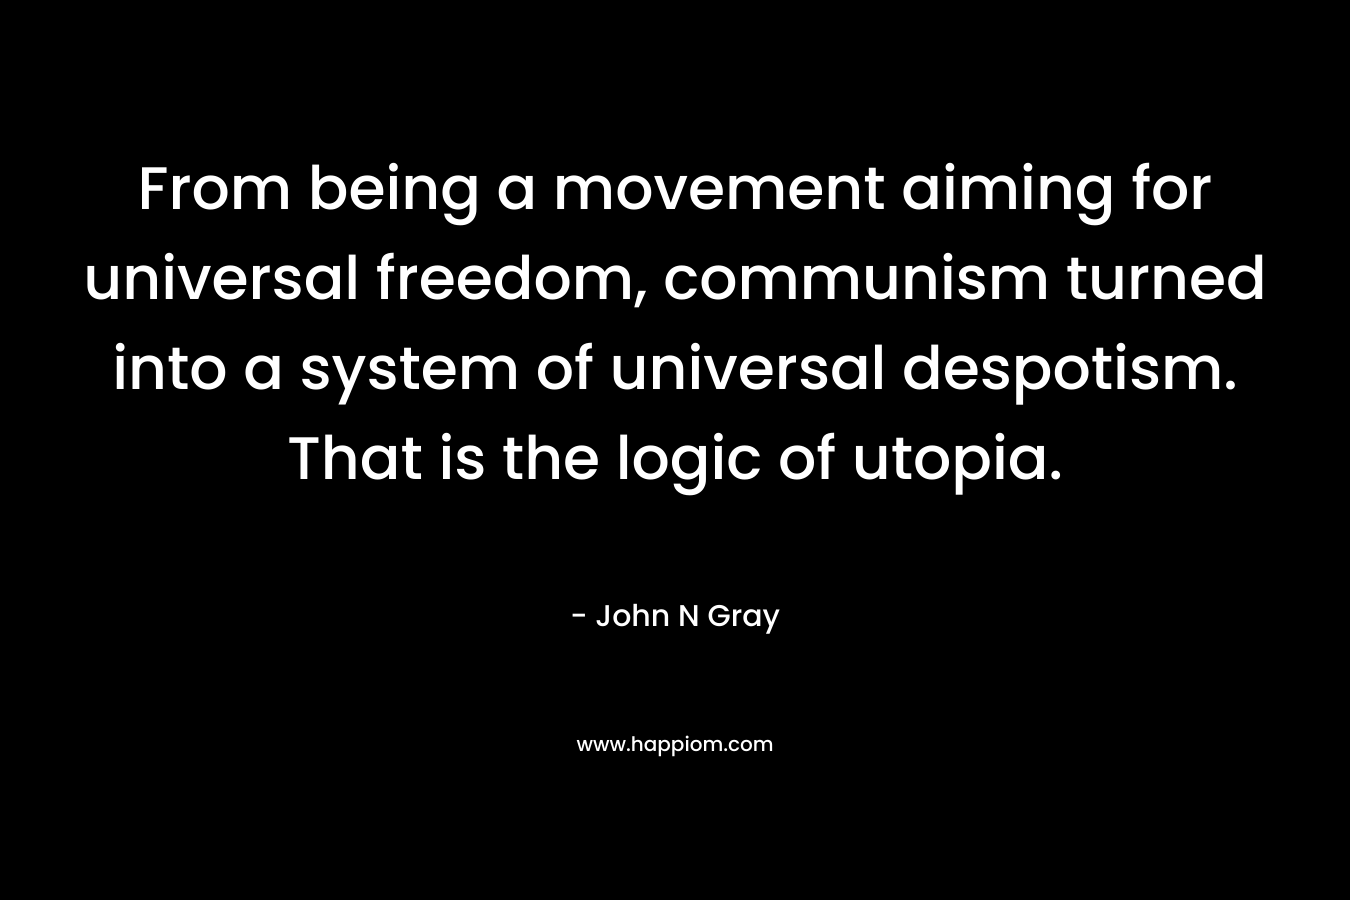 From being a movement aiming for universal freedom, communism turned into a system of universal despotism. That is the logic of utopia. – John N Gray